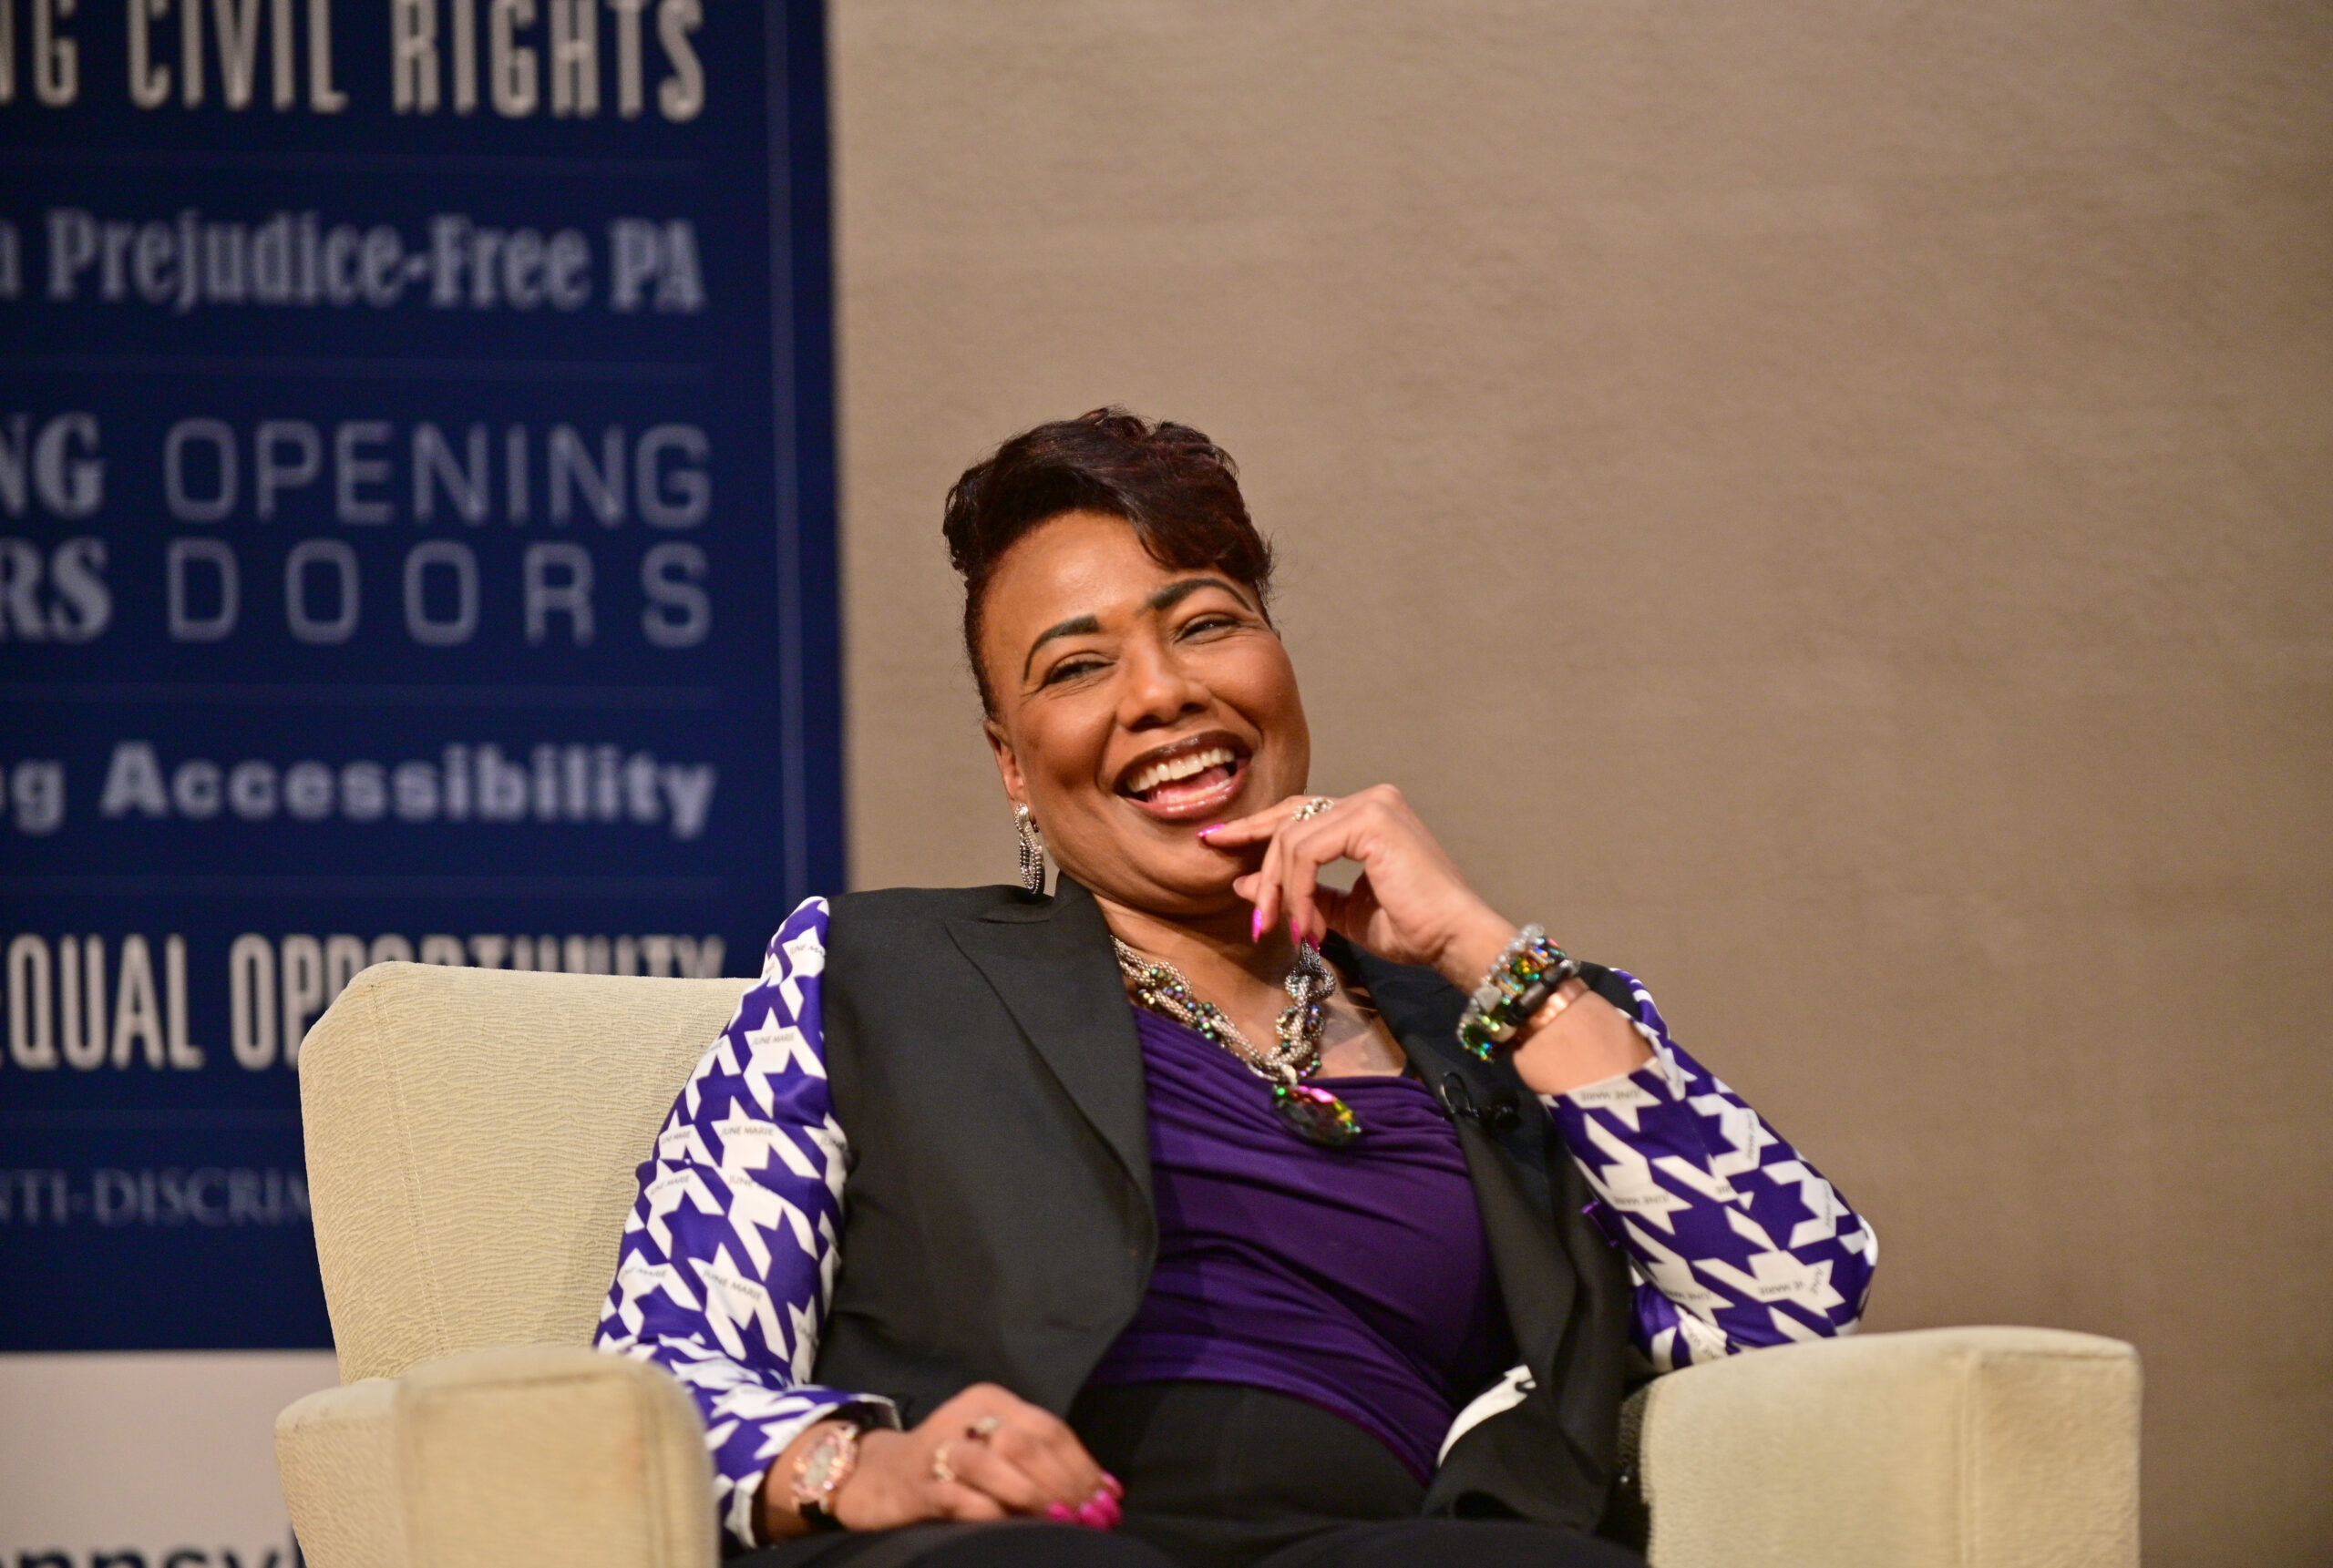 Rev. Dr. Bernice King speaks on stage during PHRC Social Justice Lecture Series at Lebanon Valley College on September 15, 2023. (Photo by Lisa Lake/Getty Images for Pennsylvania Human Relations Commission)